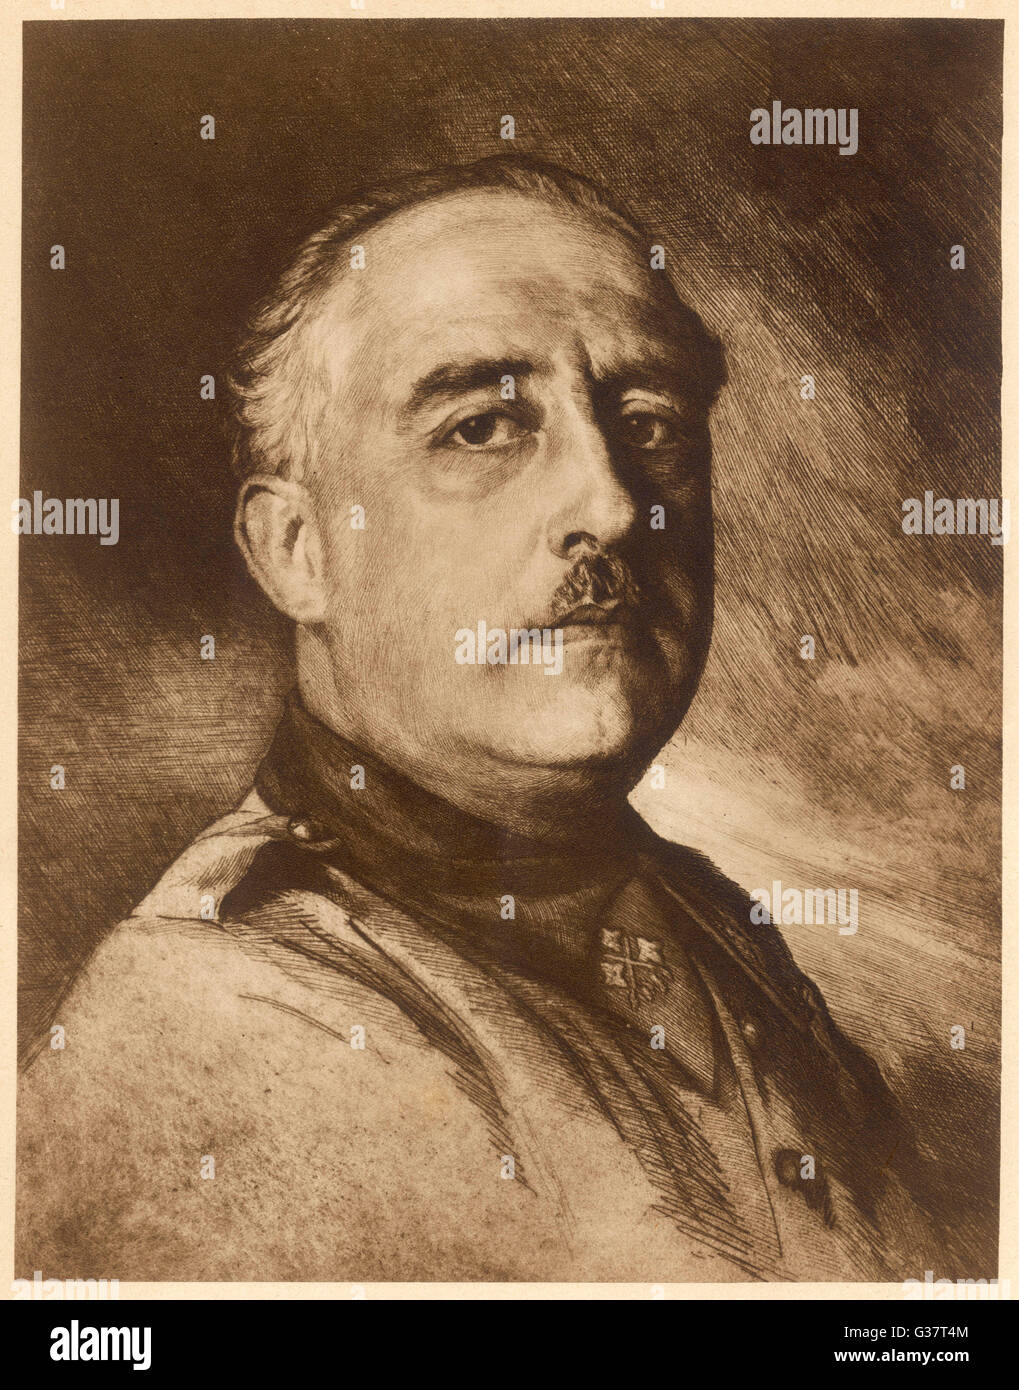 Spanish dictator and soldier, FRANCISCO FRANCO (1892-1975).        Date: 1939 Stock Photo